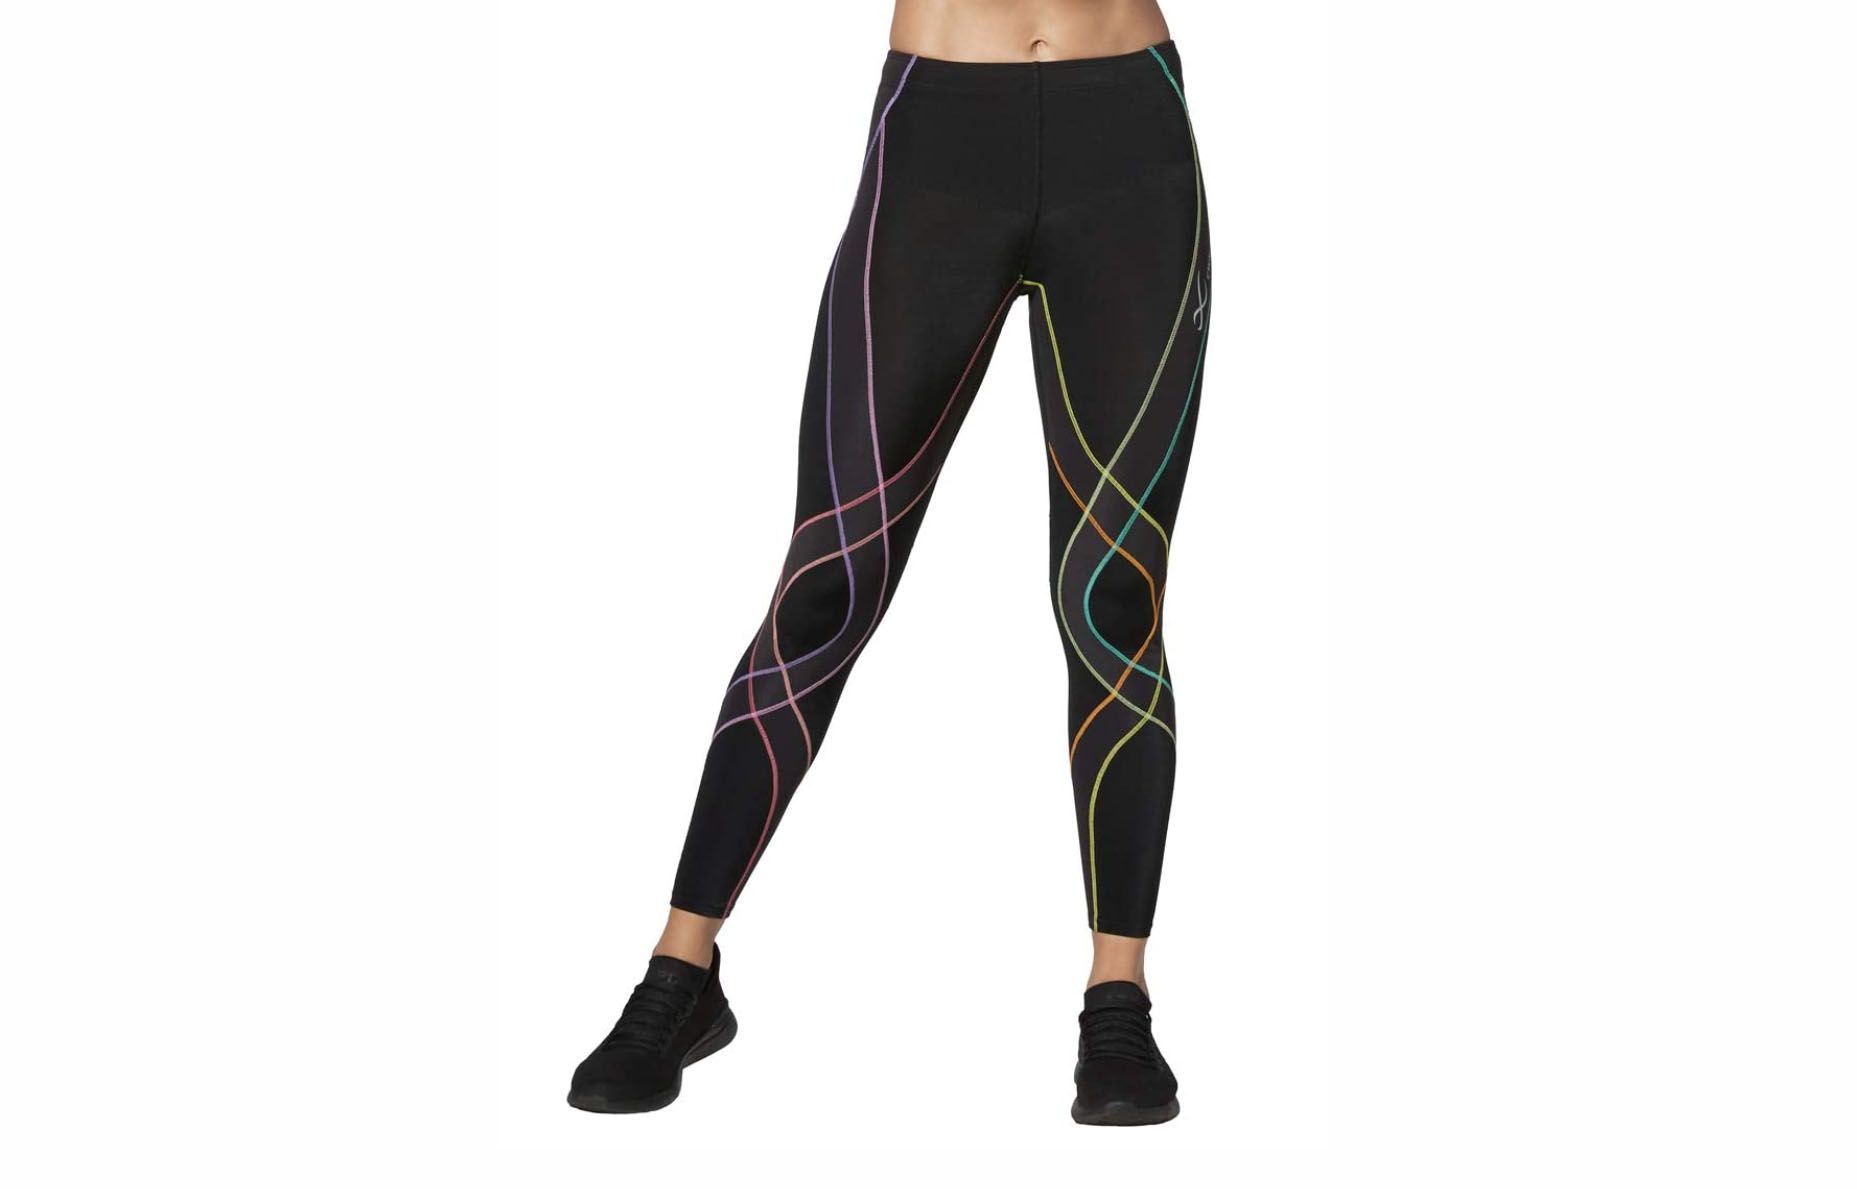 Endurance Generator Joint & Muscle Support Compression Tight